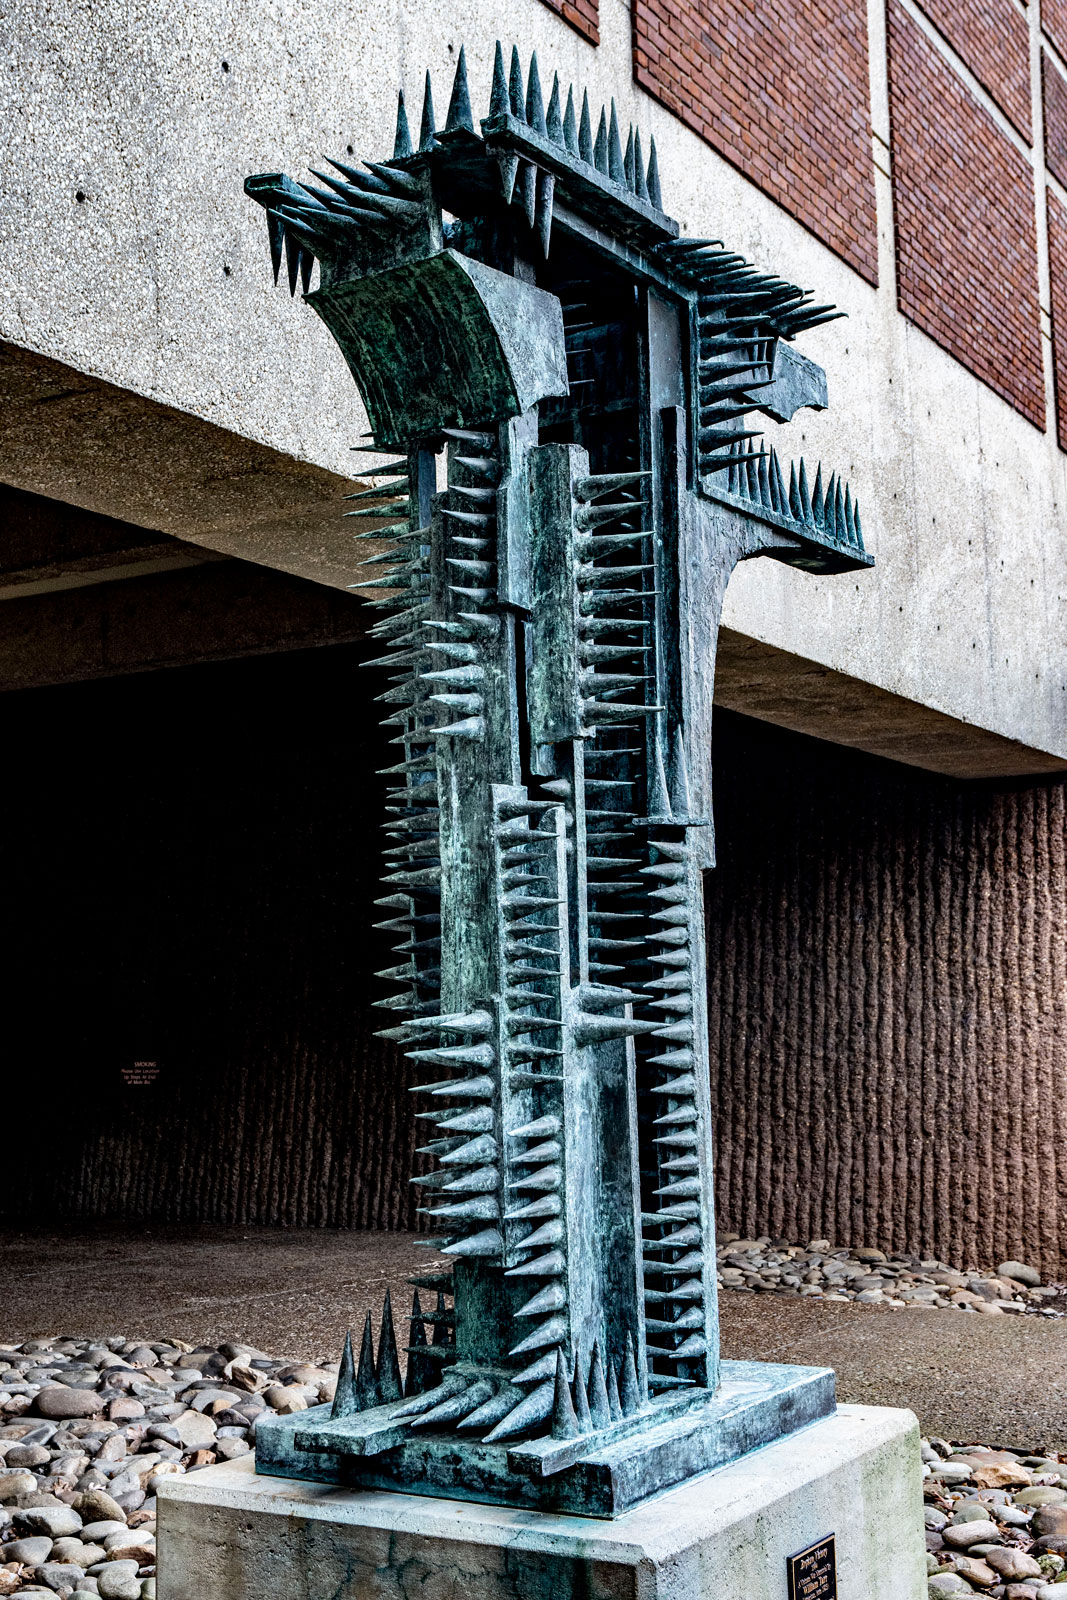 A large, bluish, cast bronze sculpture with lots of spikes sticking from it